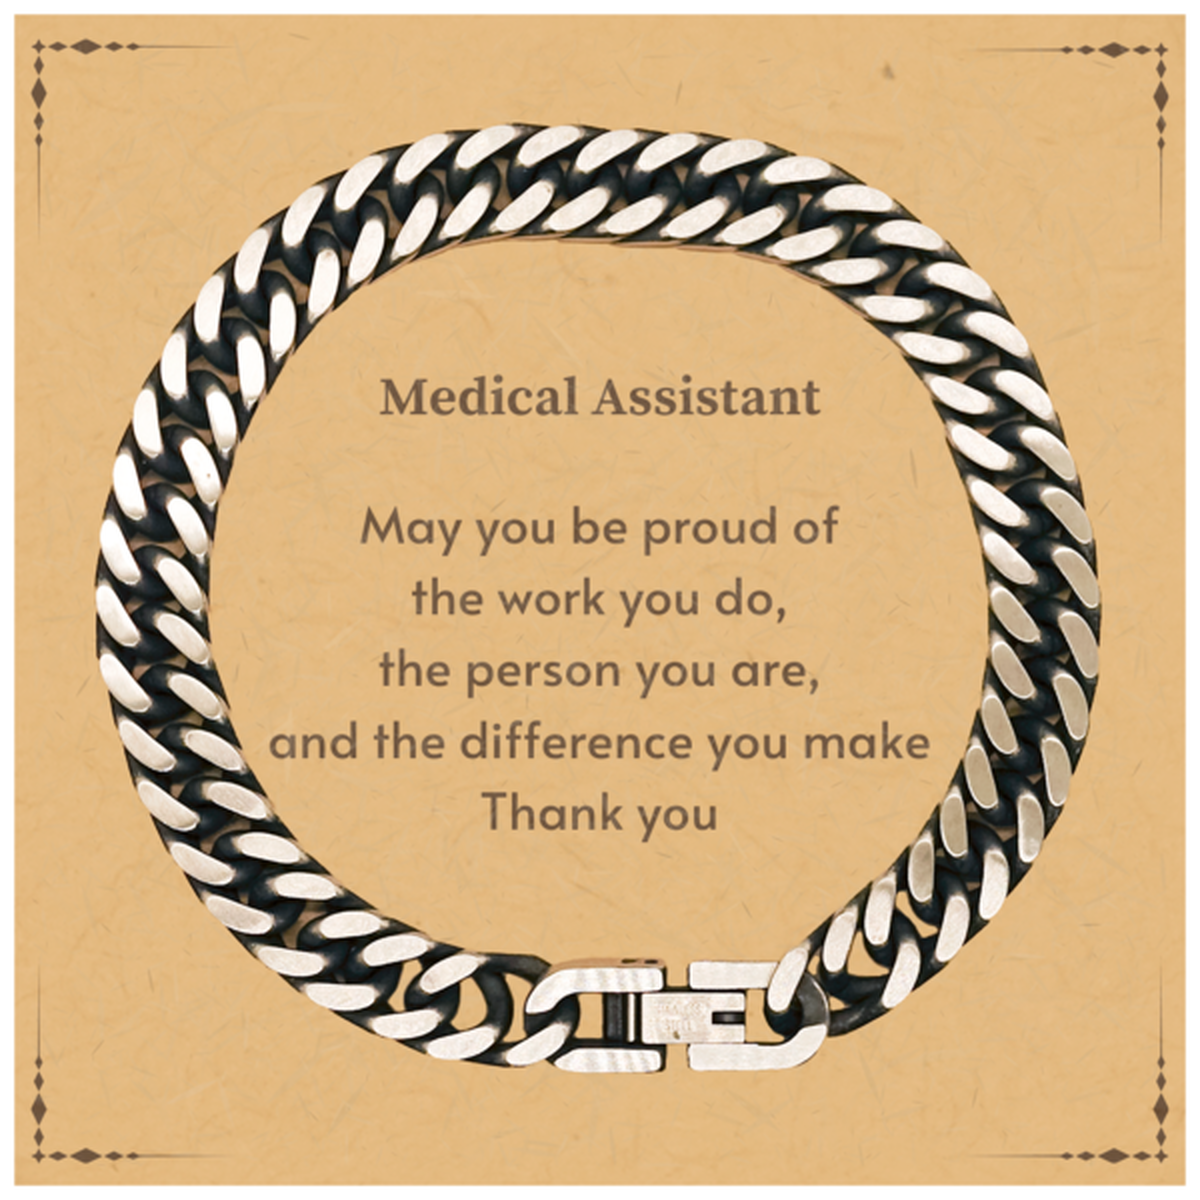 Heartwarming Cuban Link Chain Bracelet Retirement Coworkers Gifts for Medical Assistant, Medical Assistant May You be proud of the work you do, the person you are Gifts for Boss Men Women Friends